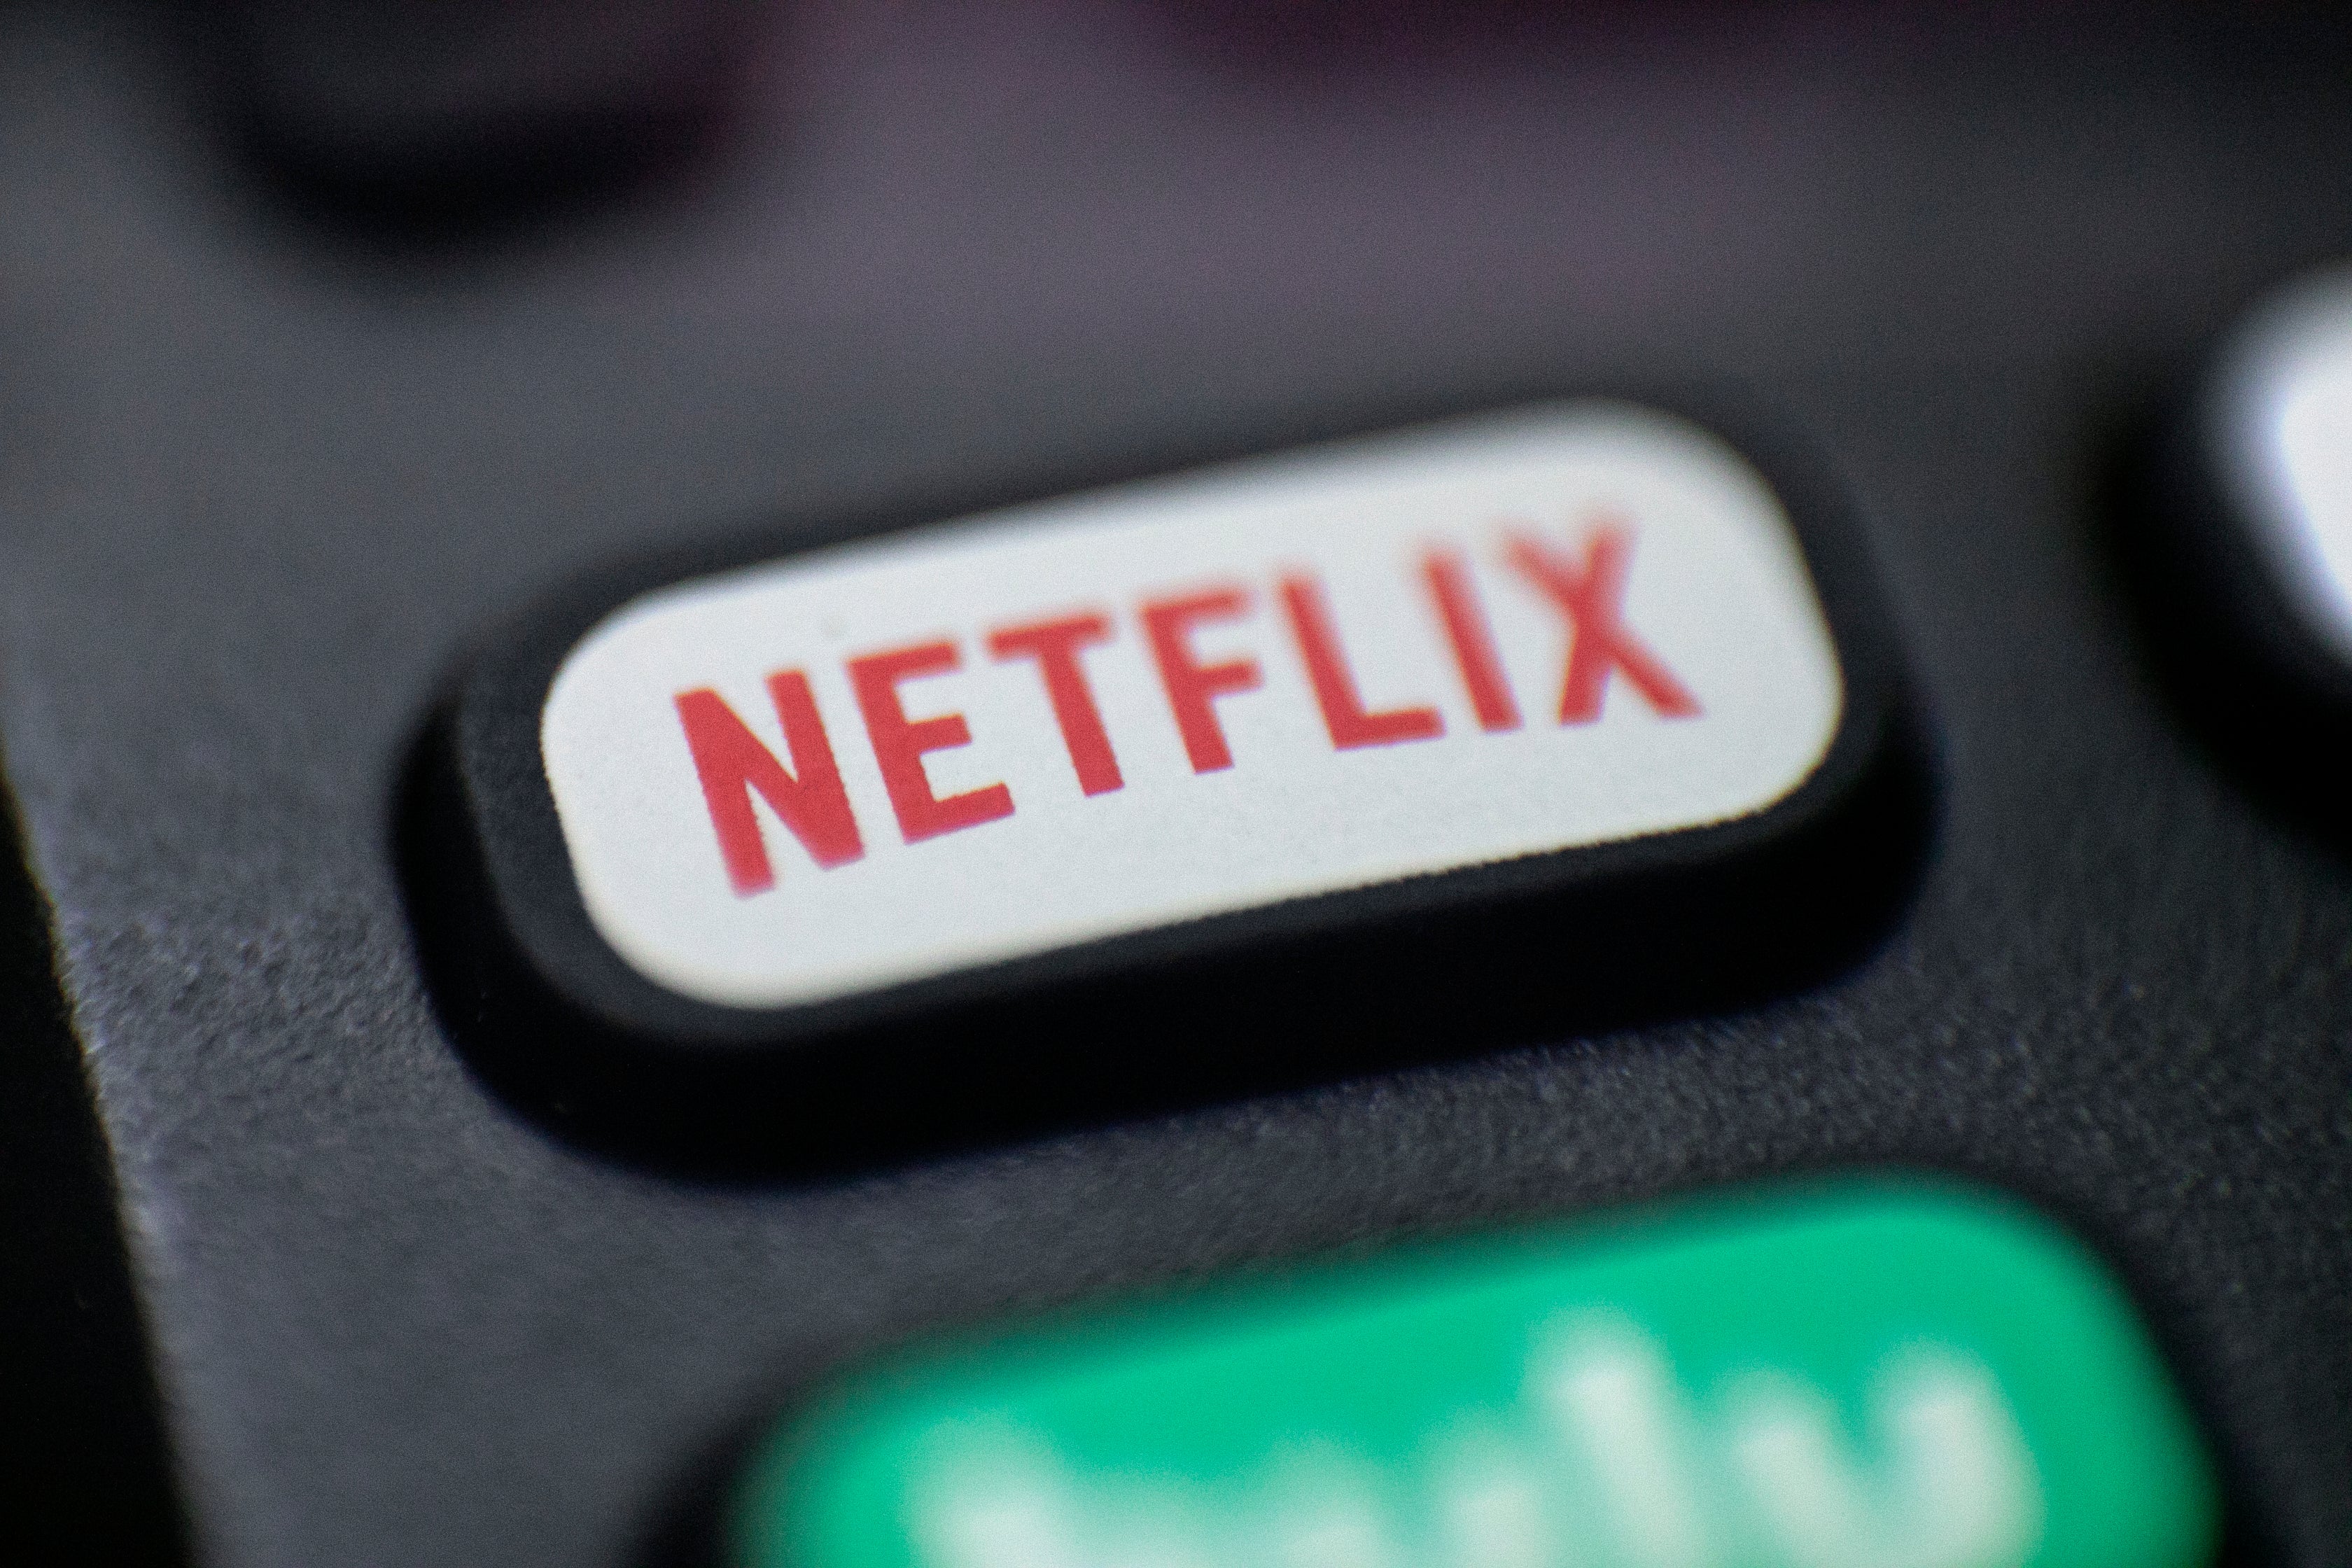 There are loads of Netflix titles tucked away in secret